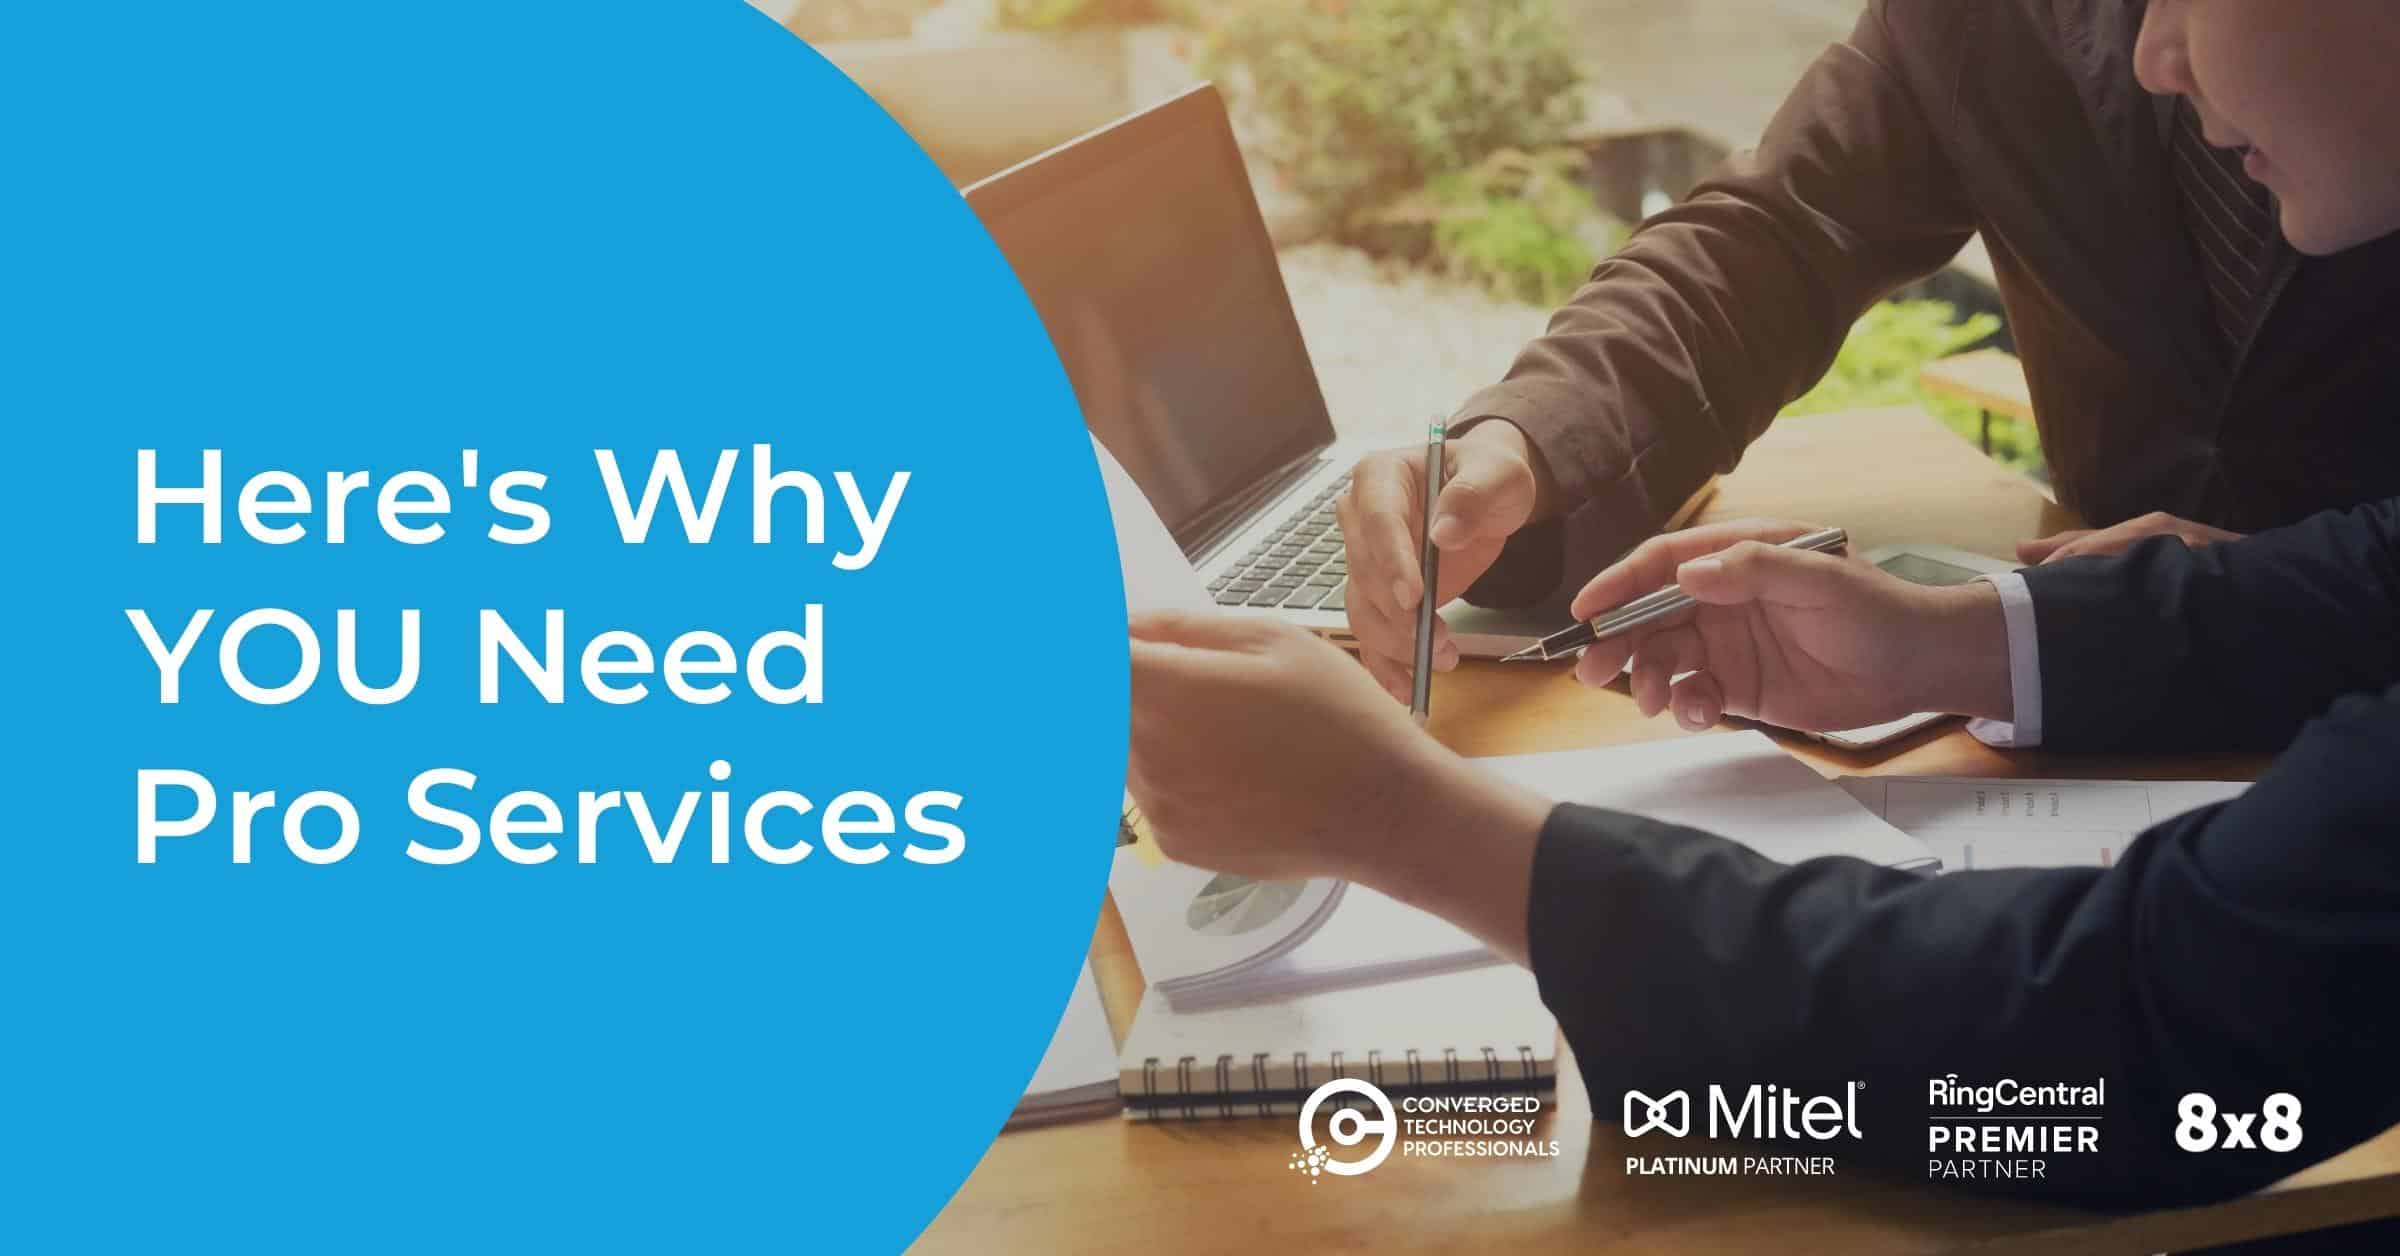 What Are Professional Services and Why Do You Need Them